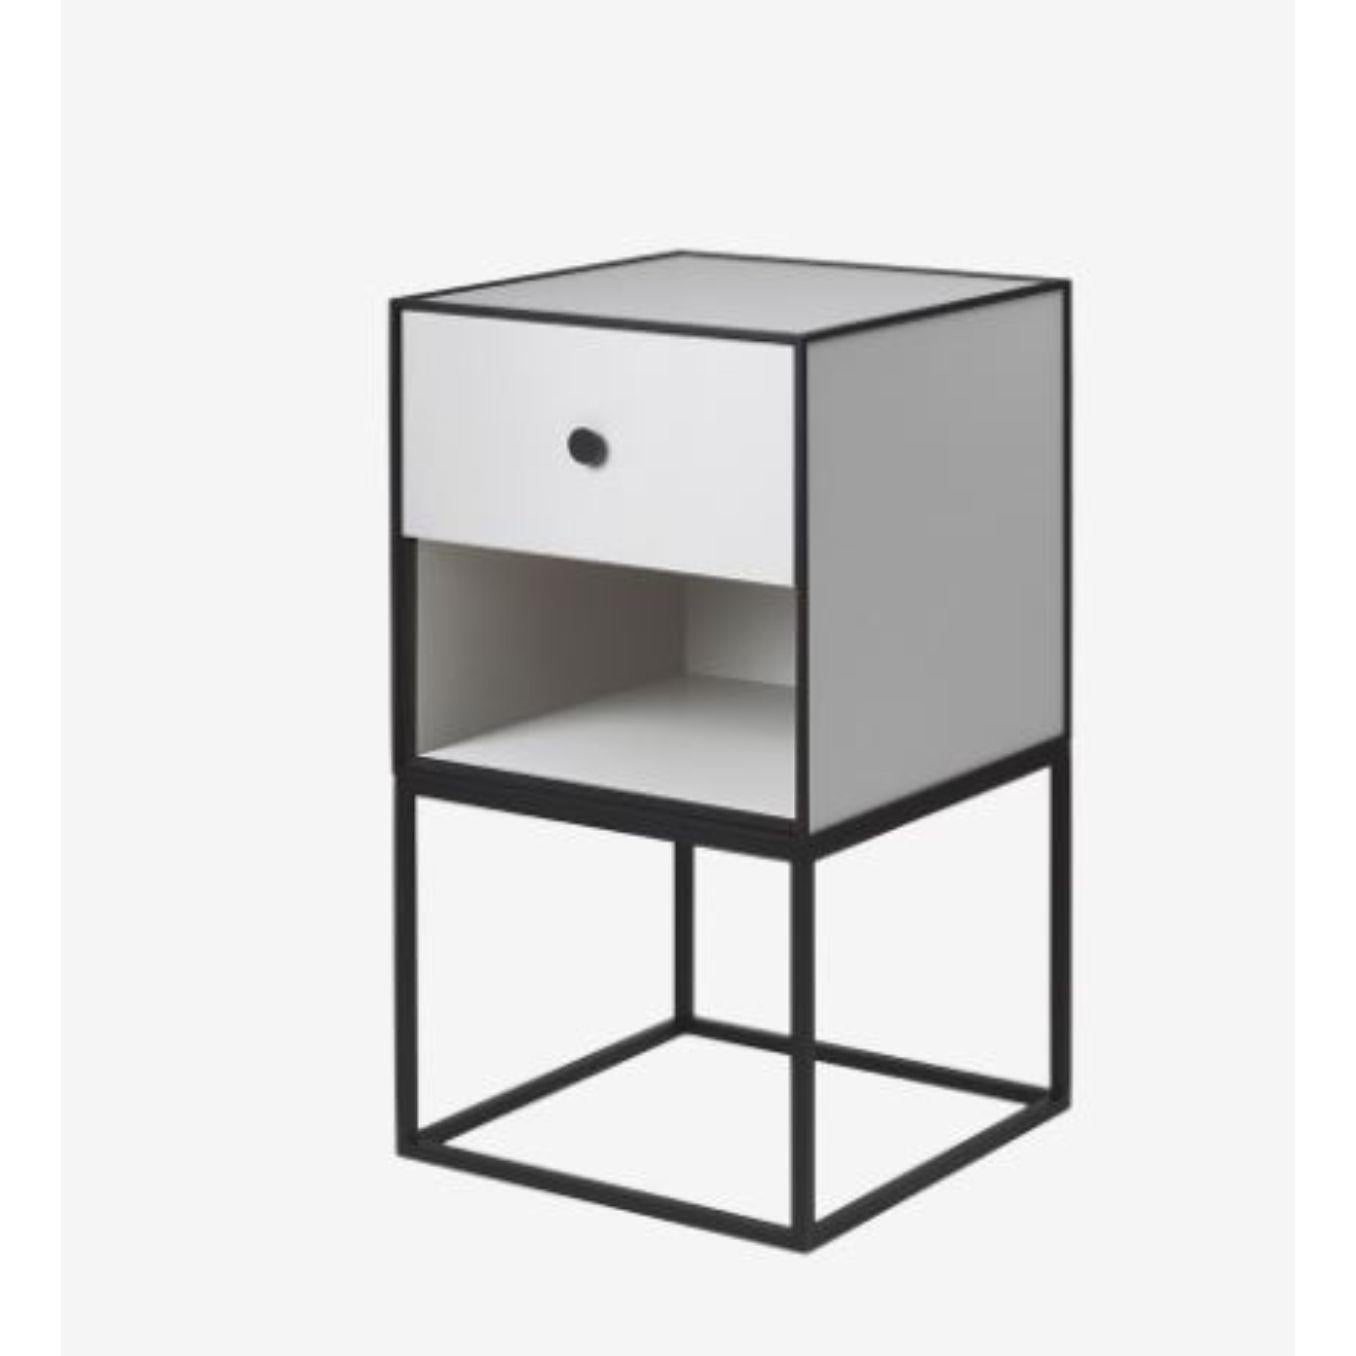 35 light grey frame sideboard with 1 drawer by Lassen.
Dimensions: W 35 x D 35 x H 63 cm. 
Materials: Finér, Melamin, Melamine, Metal, Veneer.
Also available in different colors and dimensions. 
Weight: 15.50 Kg

By Lassen is a Danish design